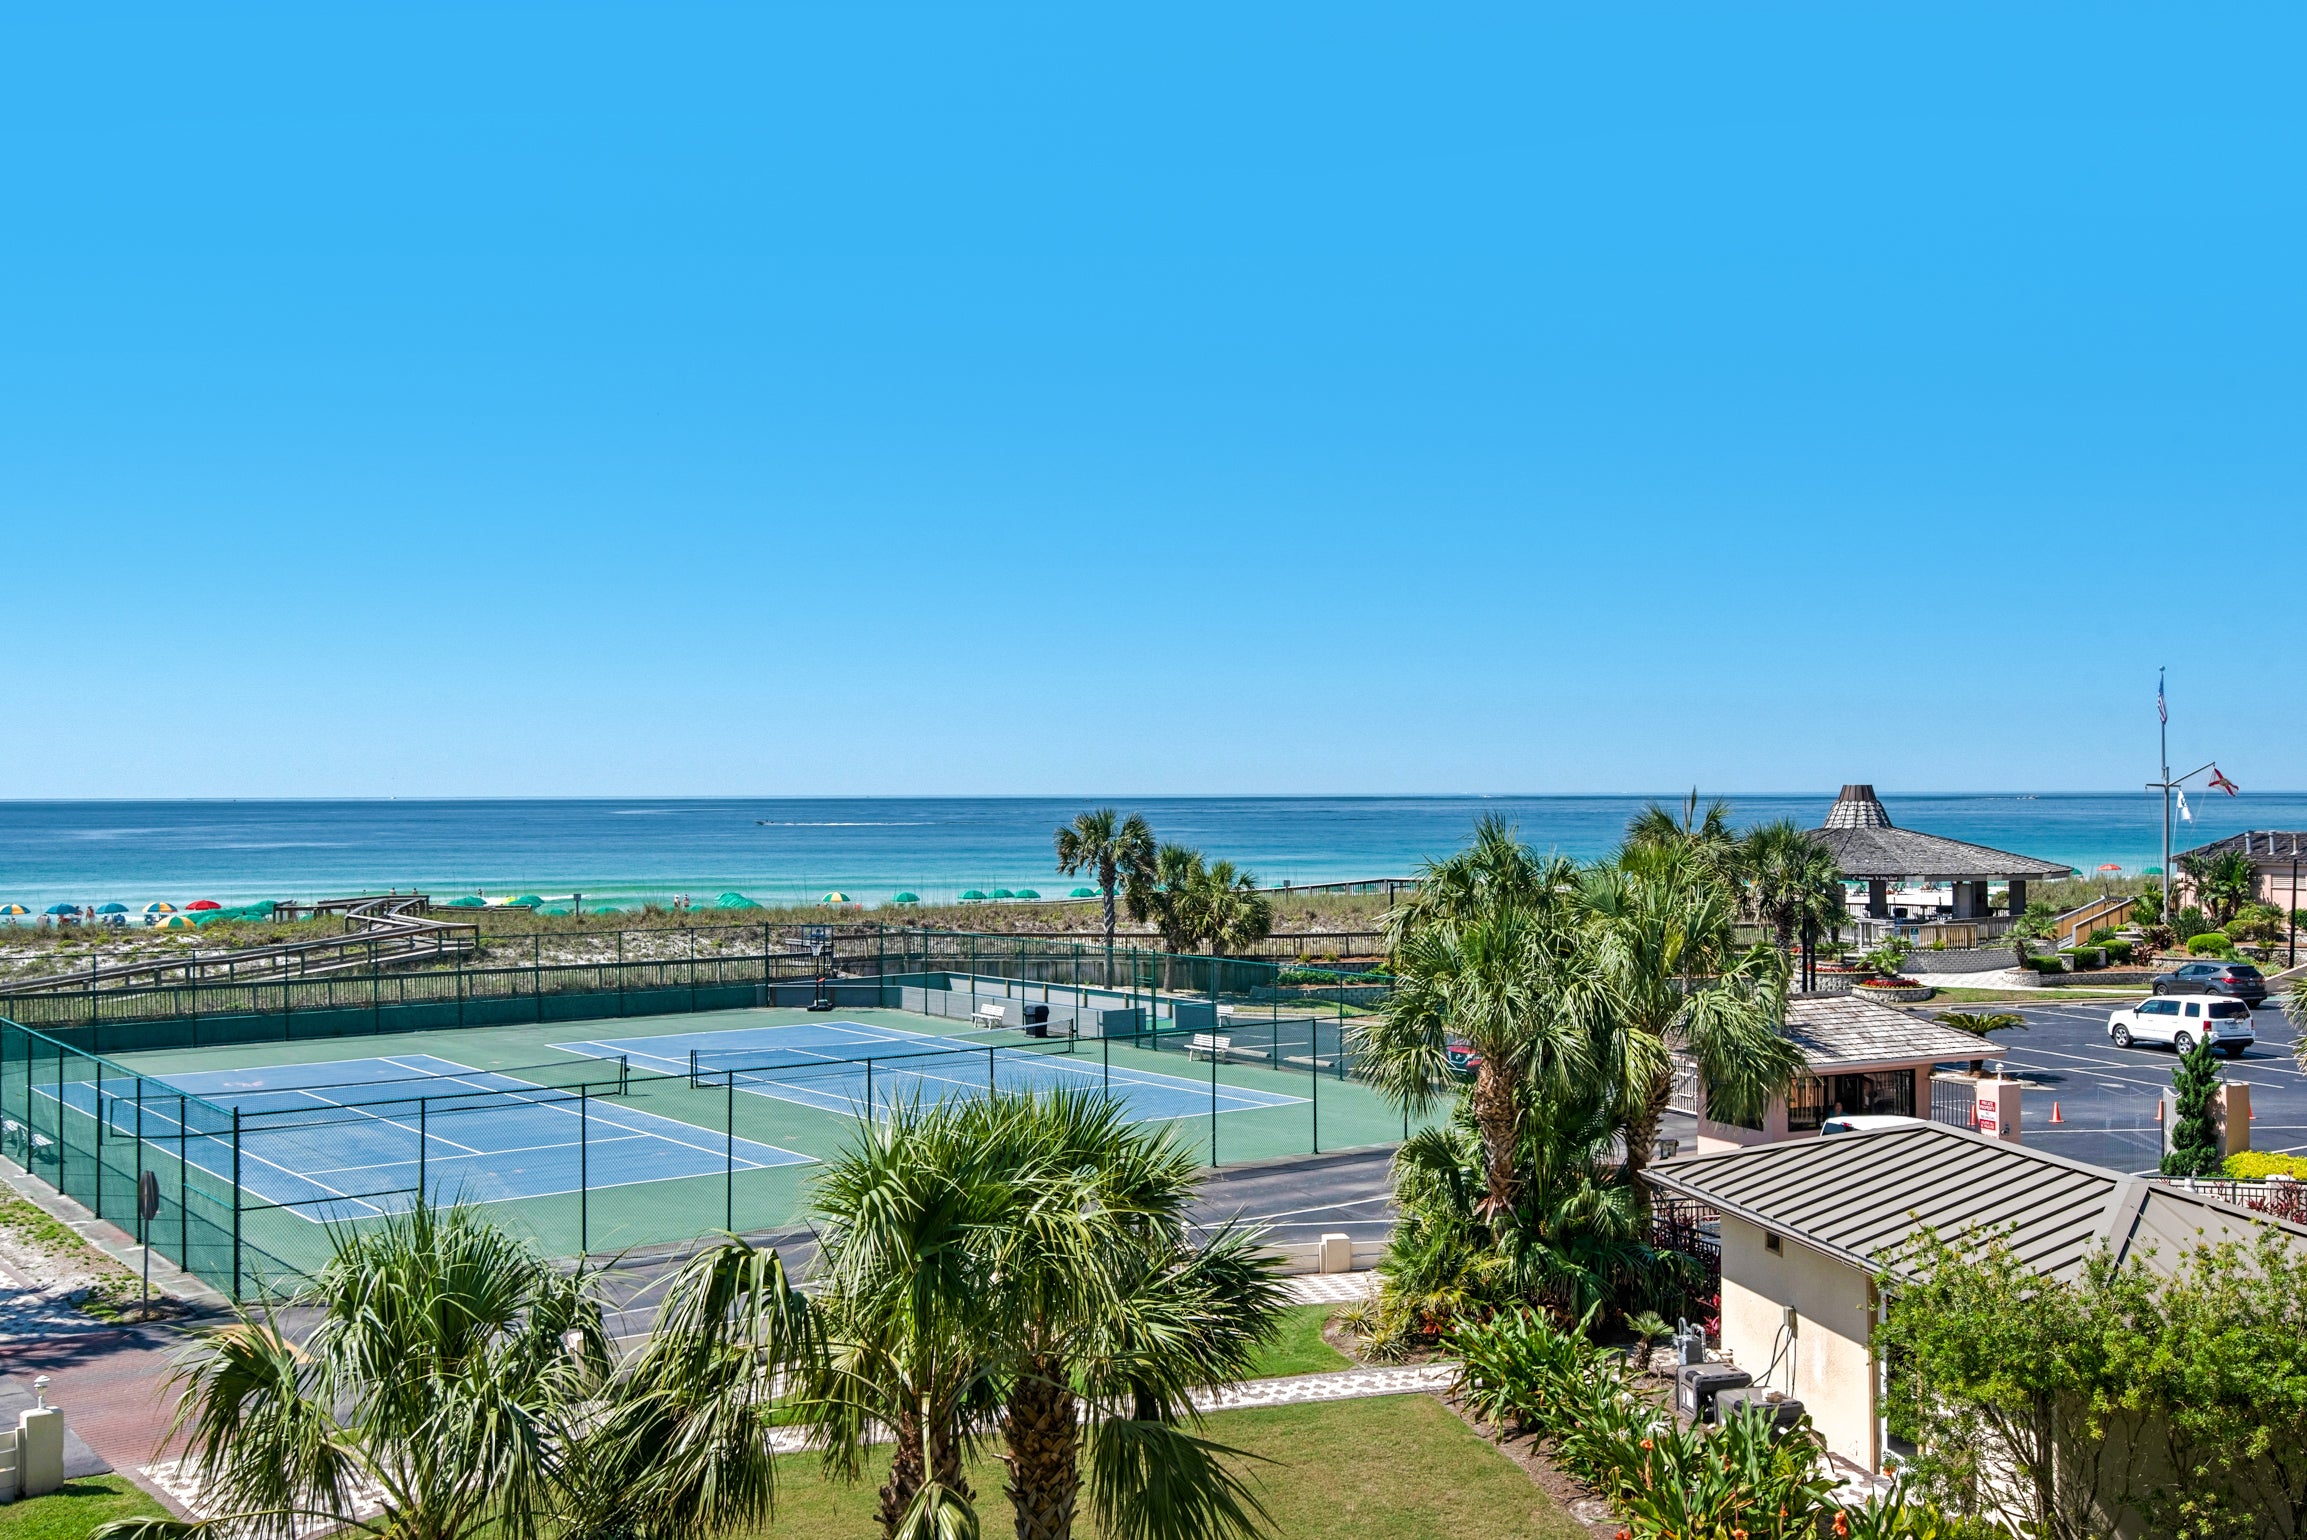 Views of the tennis courts and Gulf